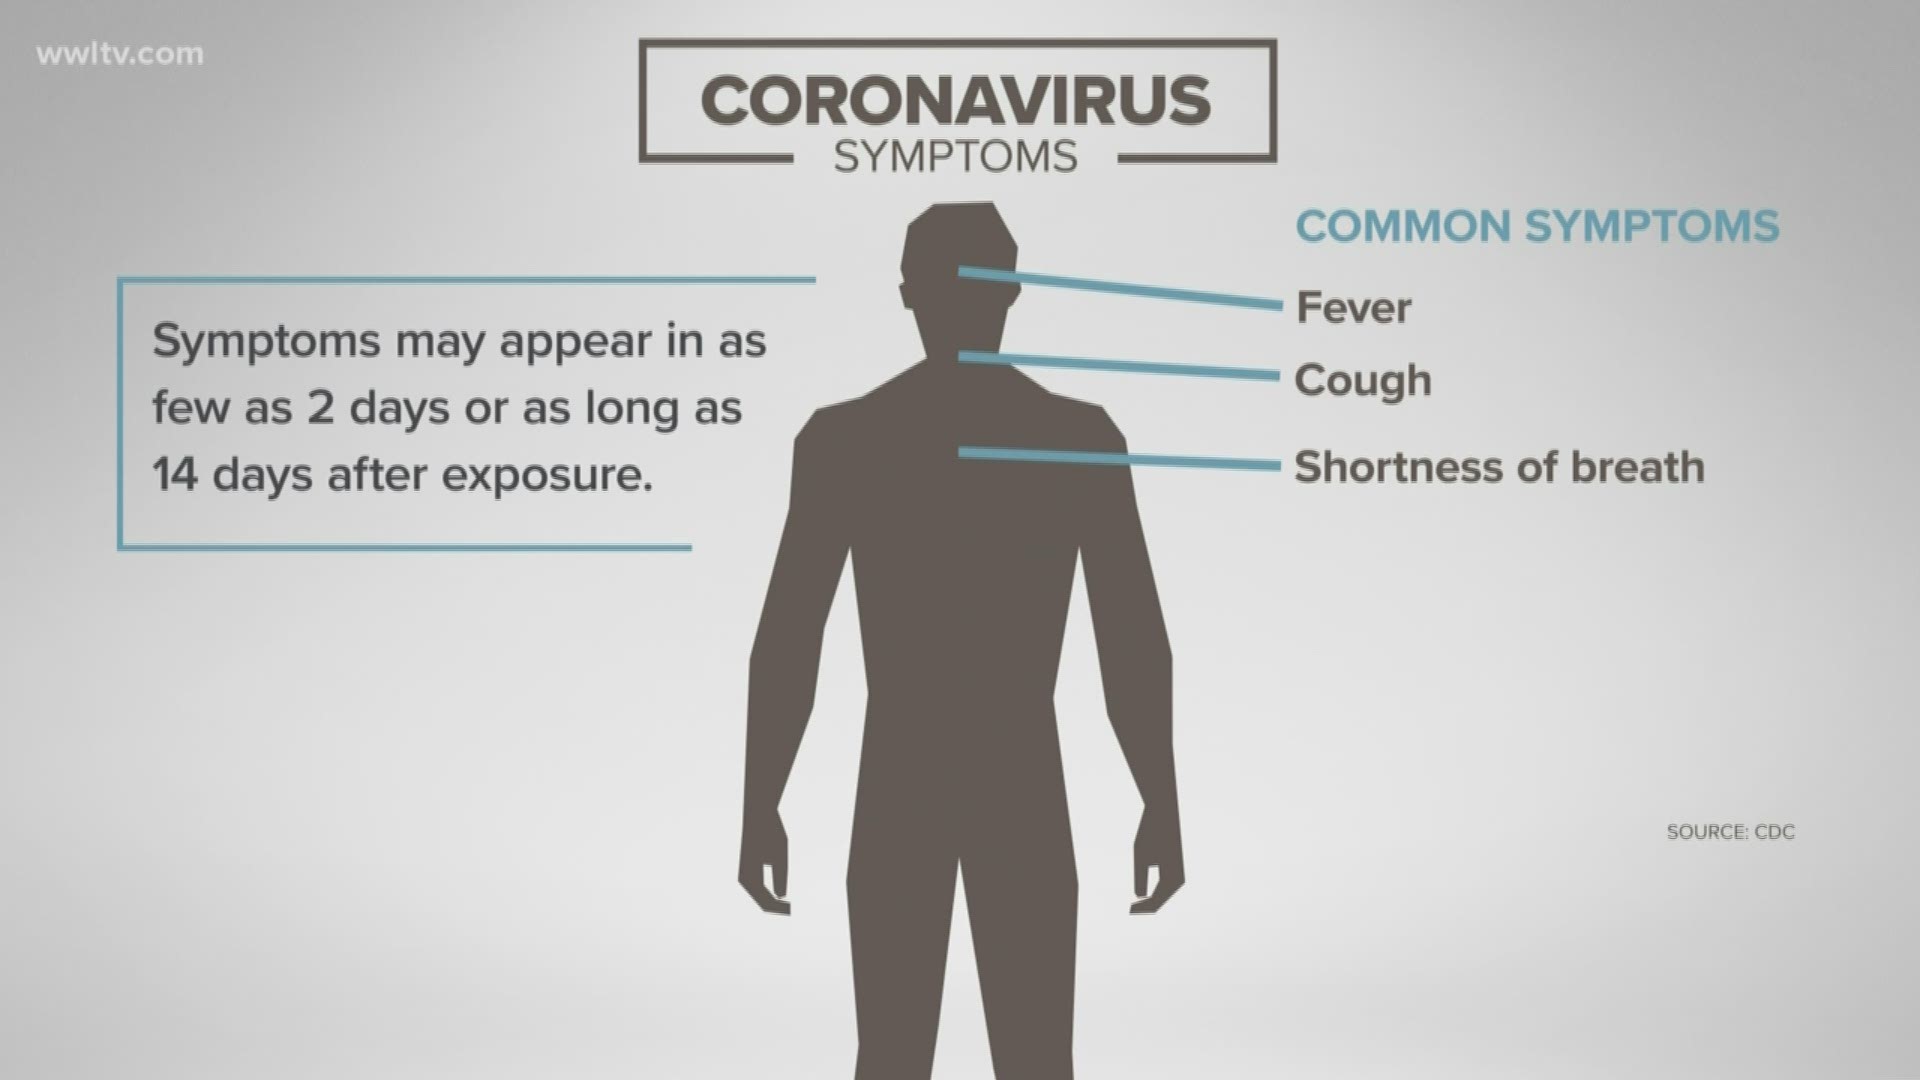 The Louisiana Department of Health reported its first presumptive positive case of COVID-19 in the state Monday afternoon.